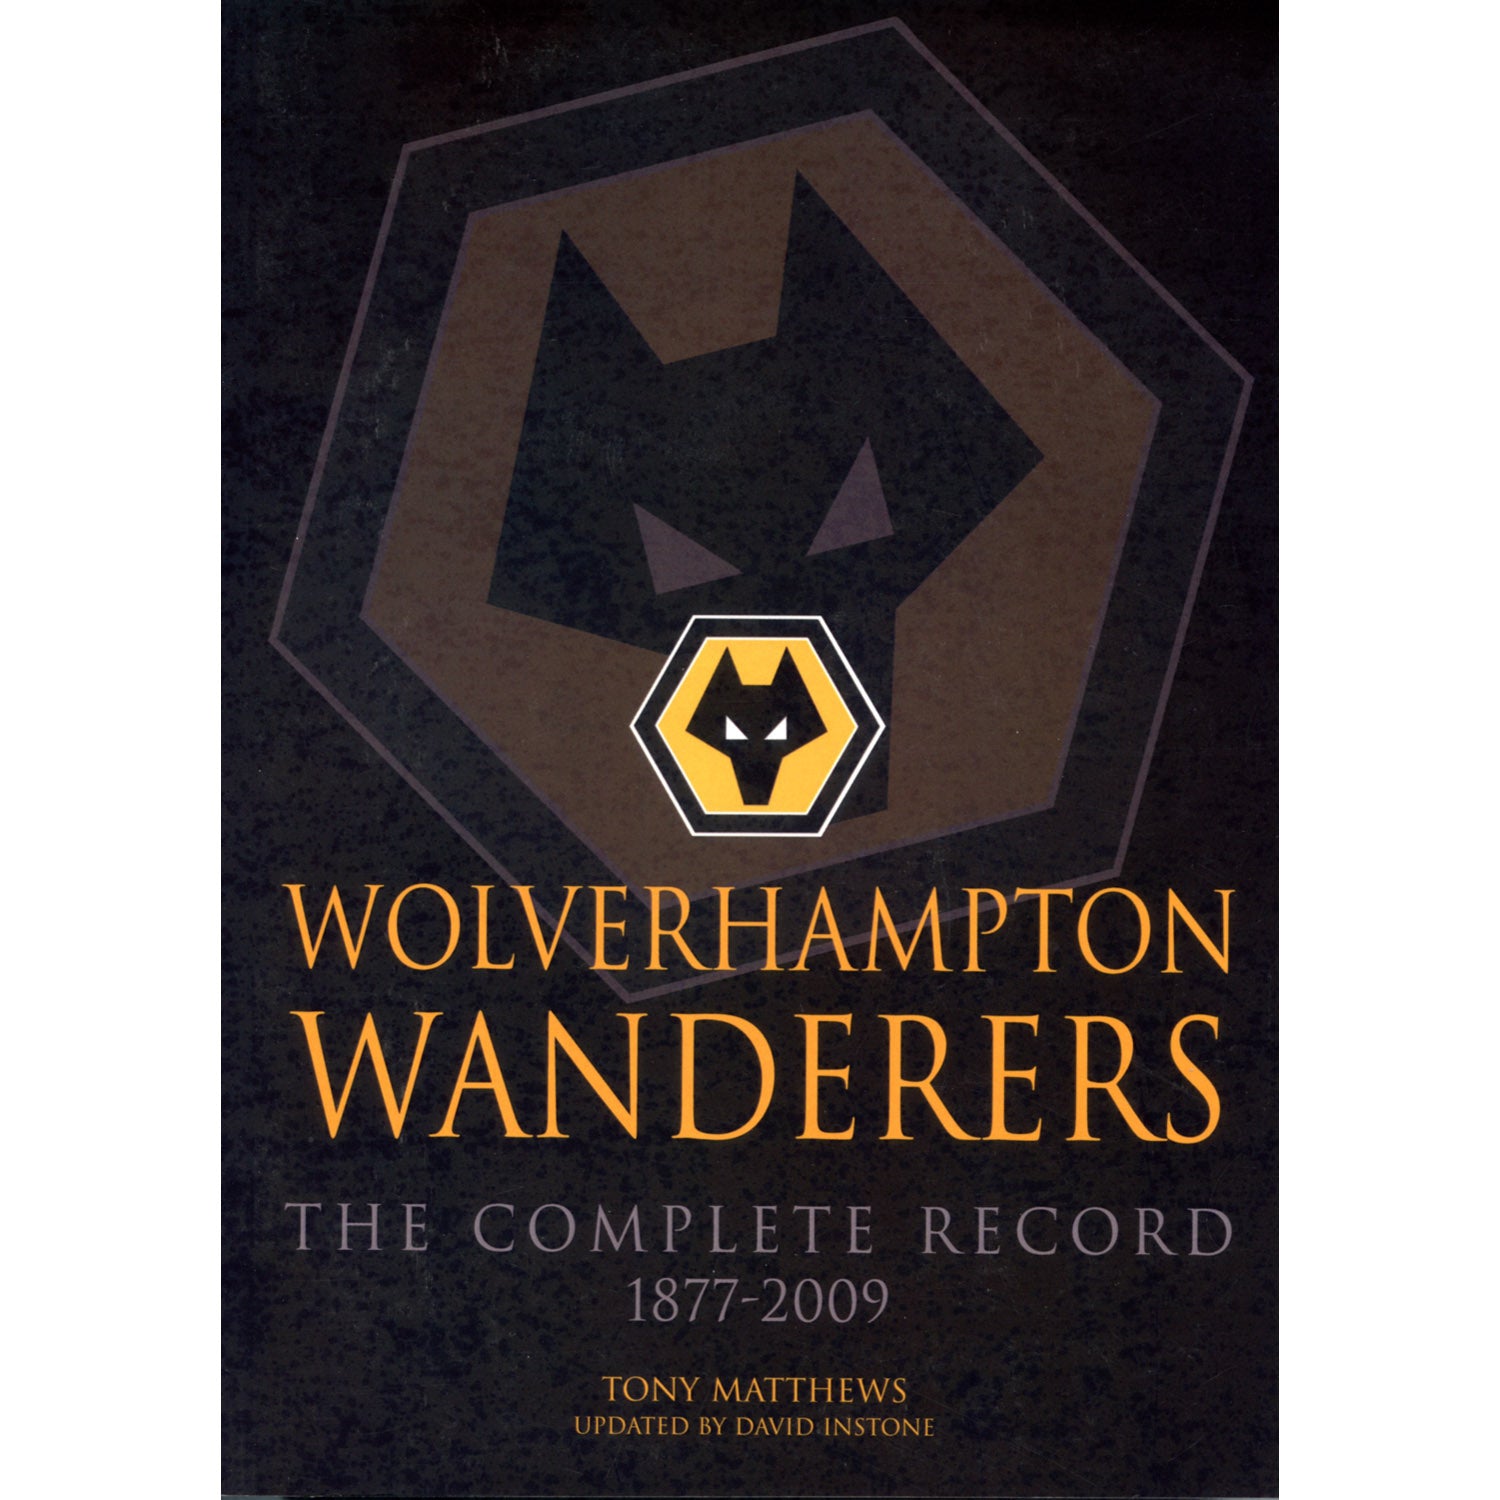 Wolverhampton Wanderers – The Complete Record 1877-2009